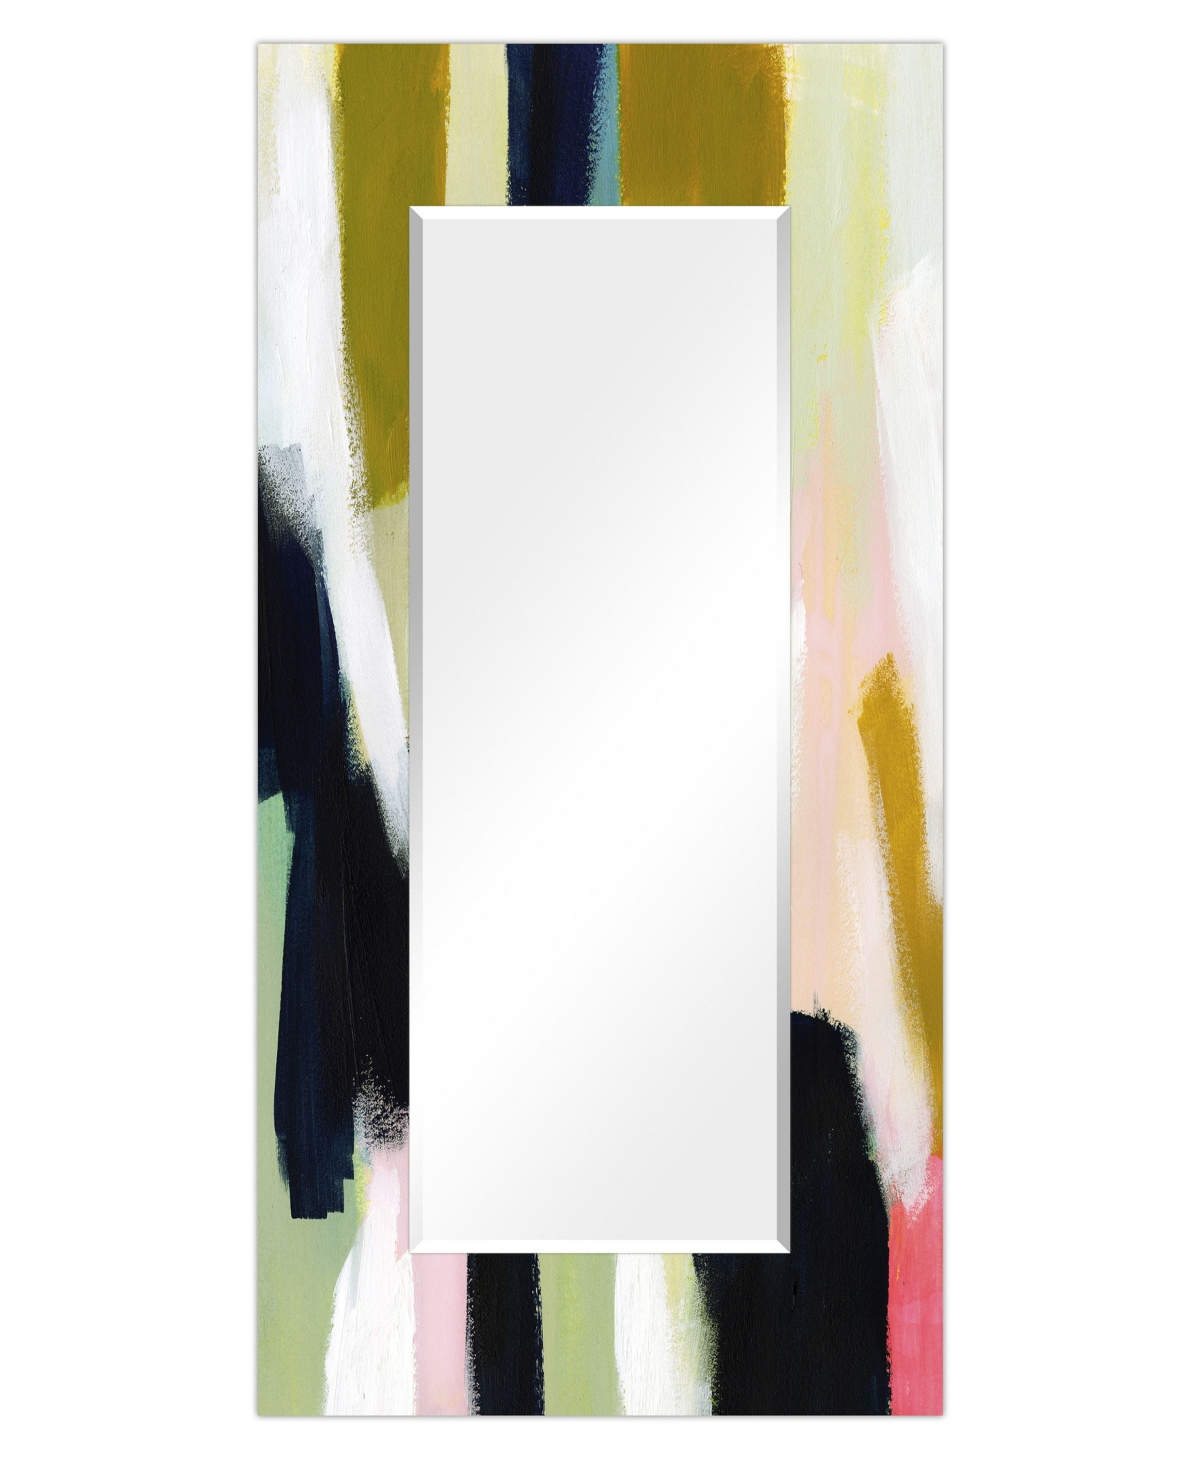 Empire Art Direct "sunder Ii" Rectangular Beveled Mirror On Free Floating Printed Tempered Art Glass, 72" X 36" X 0.4" In Multi-color